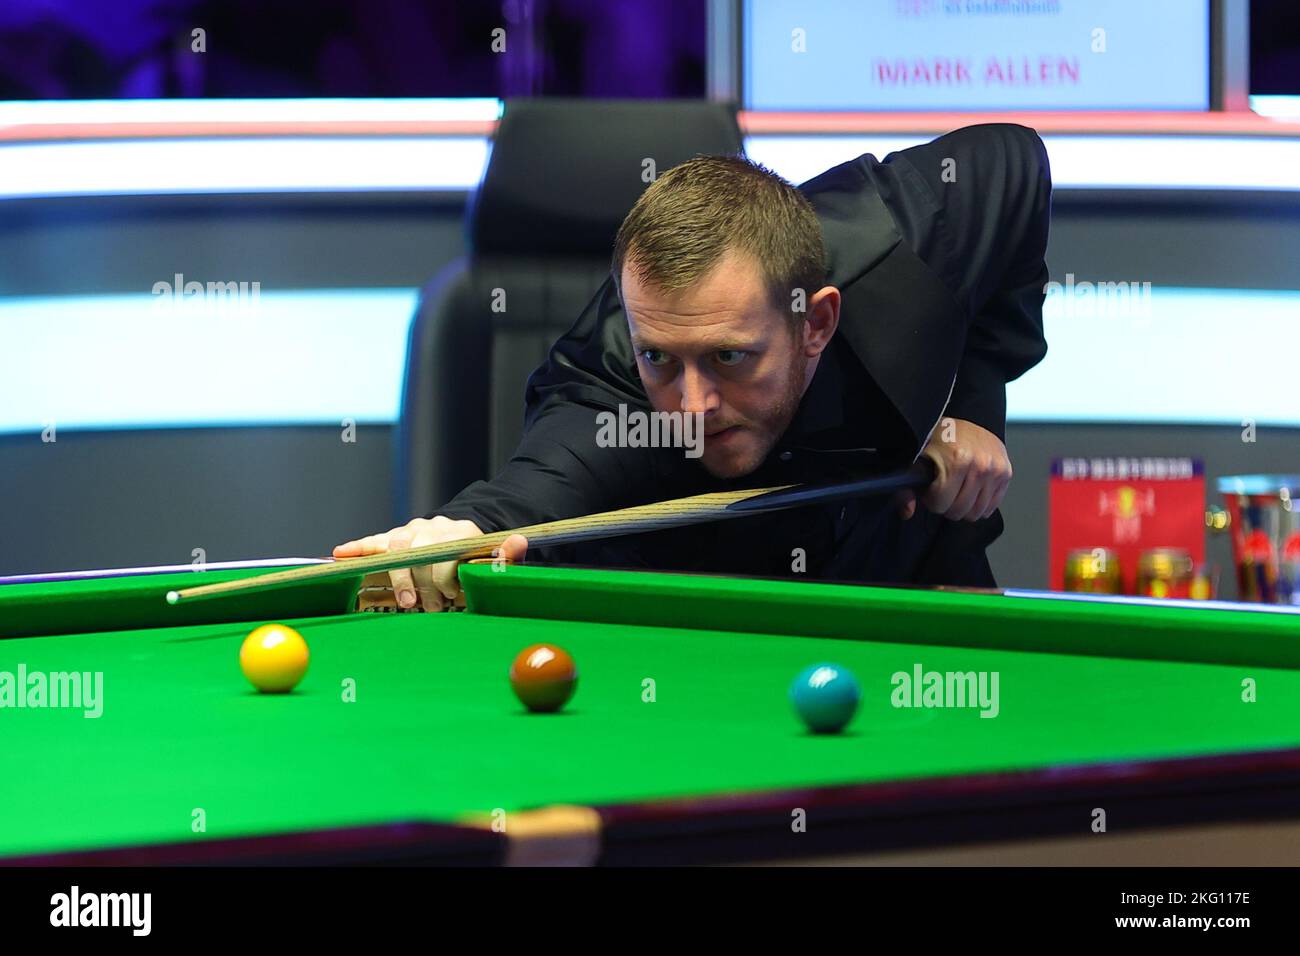 York, Britain. 20th Nov, 2022. Mark Allen of Northern Ireland competes during the final match against Ding Junhui of China at 2022 UK Snooker Championship in York, Britain, Nov